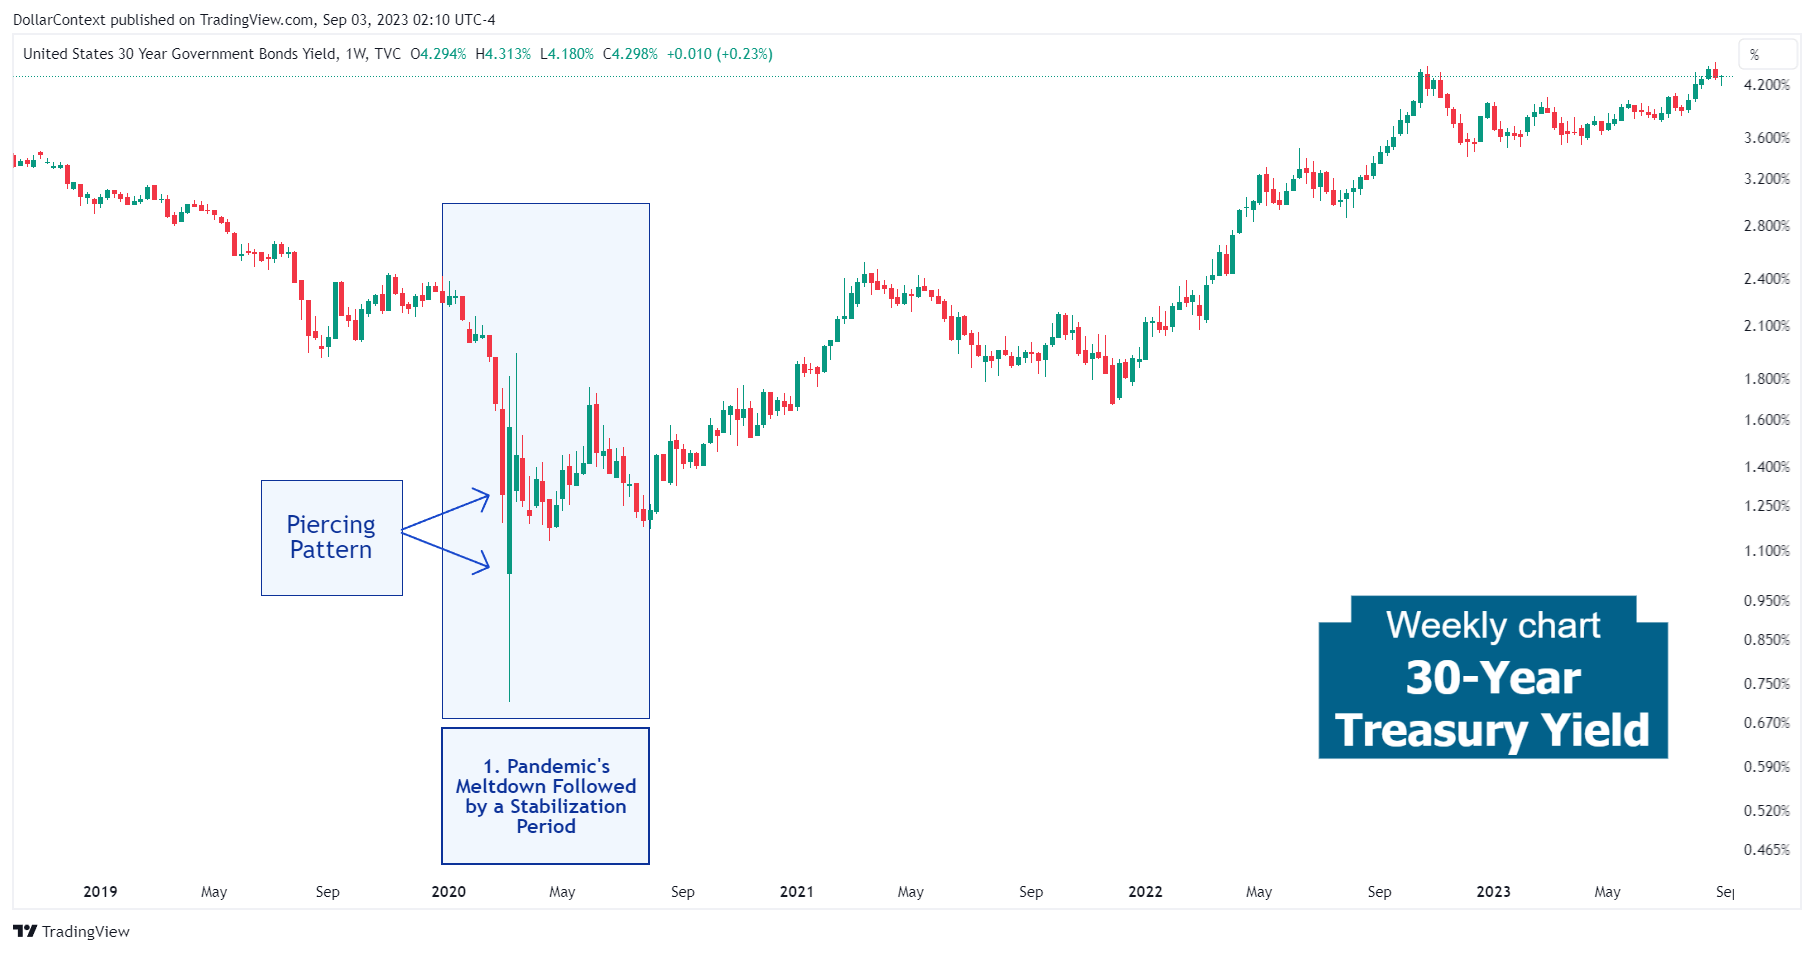 30-Year Treasury Yield: Quick Recovery by the End of 2020 and Throughout 2021 (Weekly Chart)